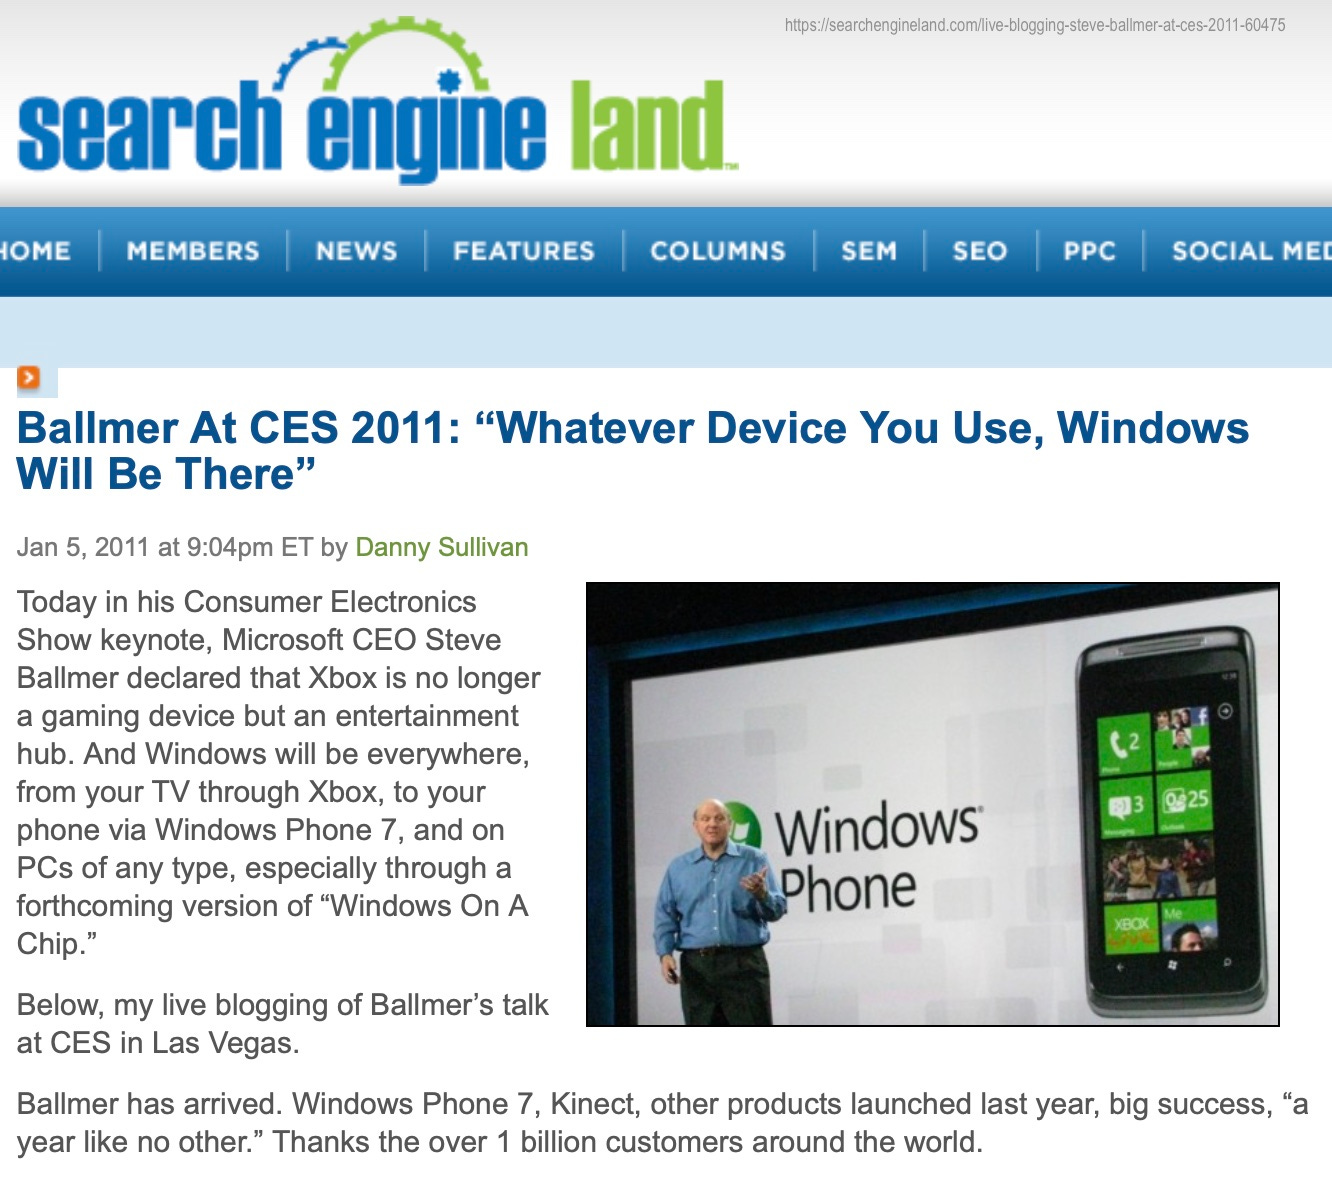 Story with headline Ballmer at CES 2011: "Whatever Device You Use, Windows Will Be There"